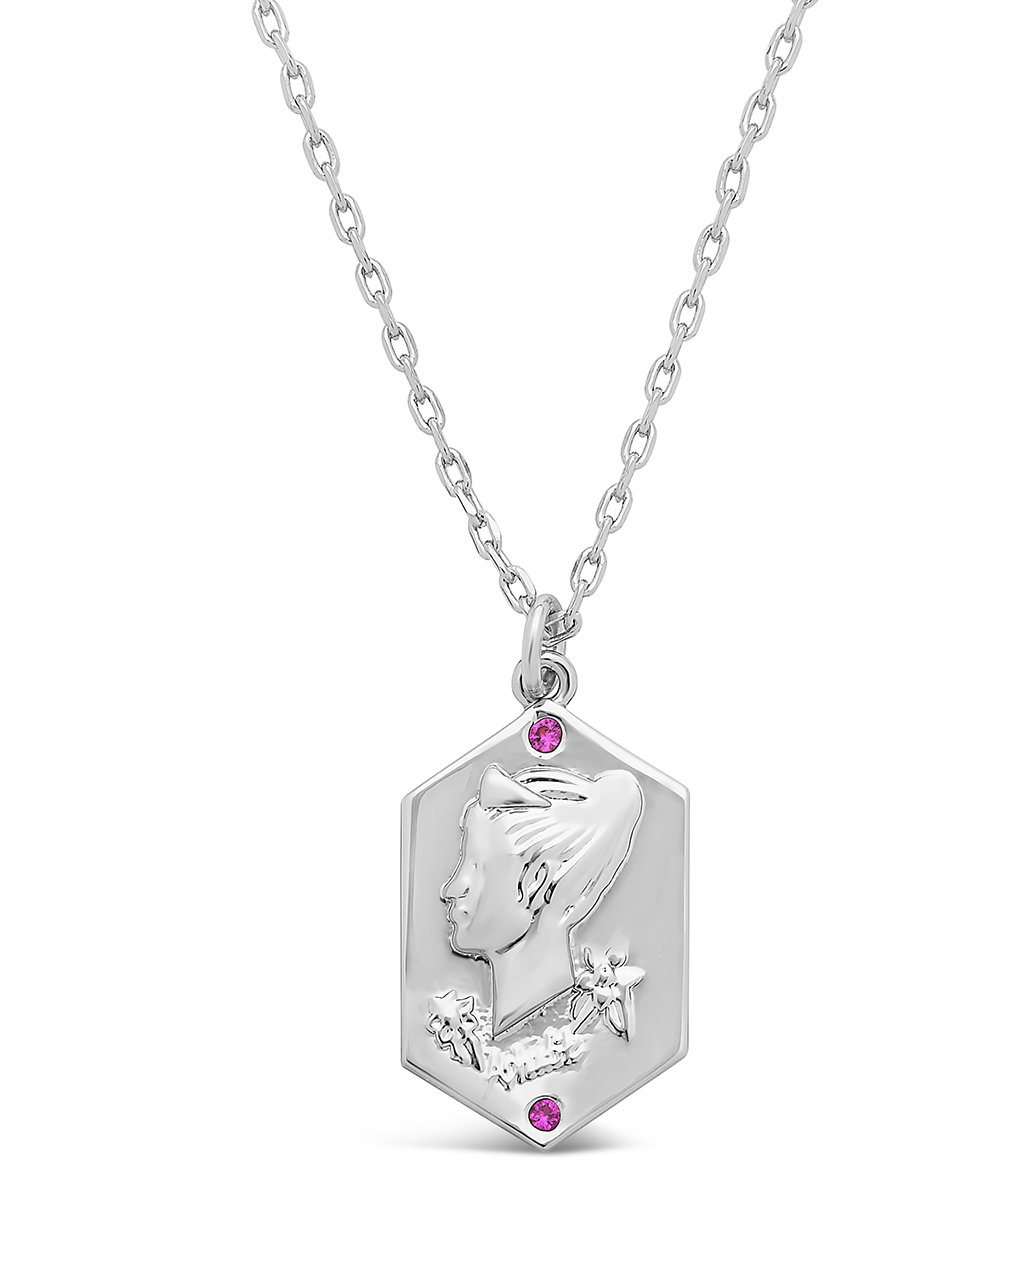 Aphrodite Raised Pendant Necklace Sterling Forever Silver